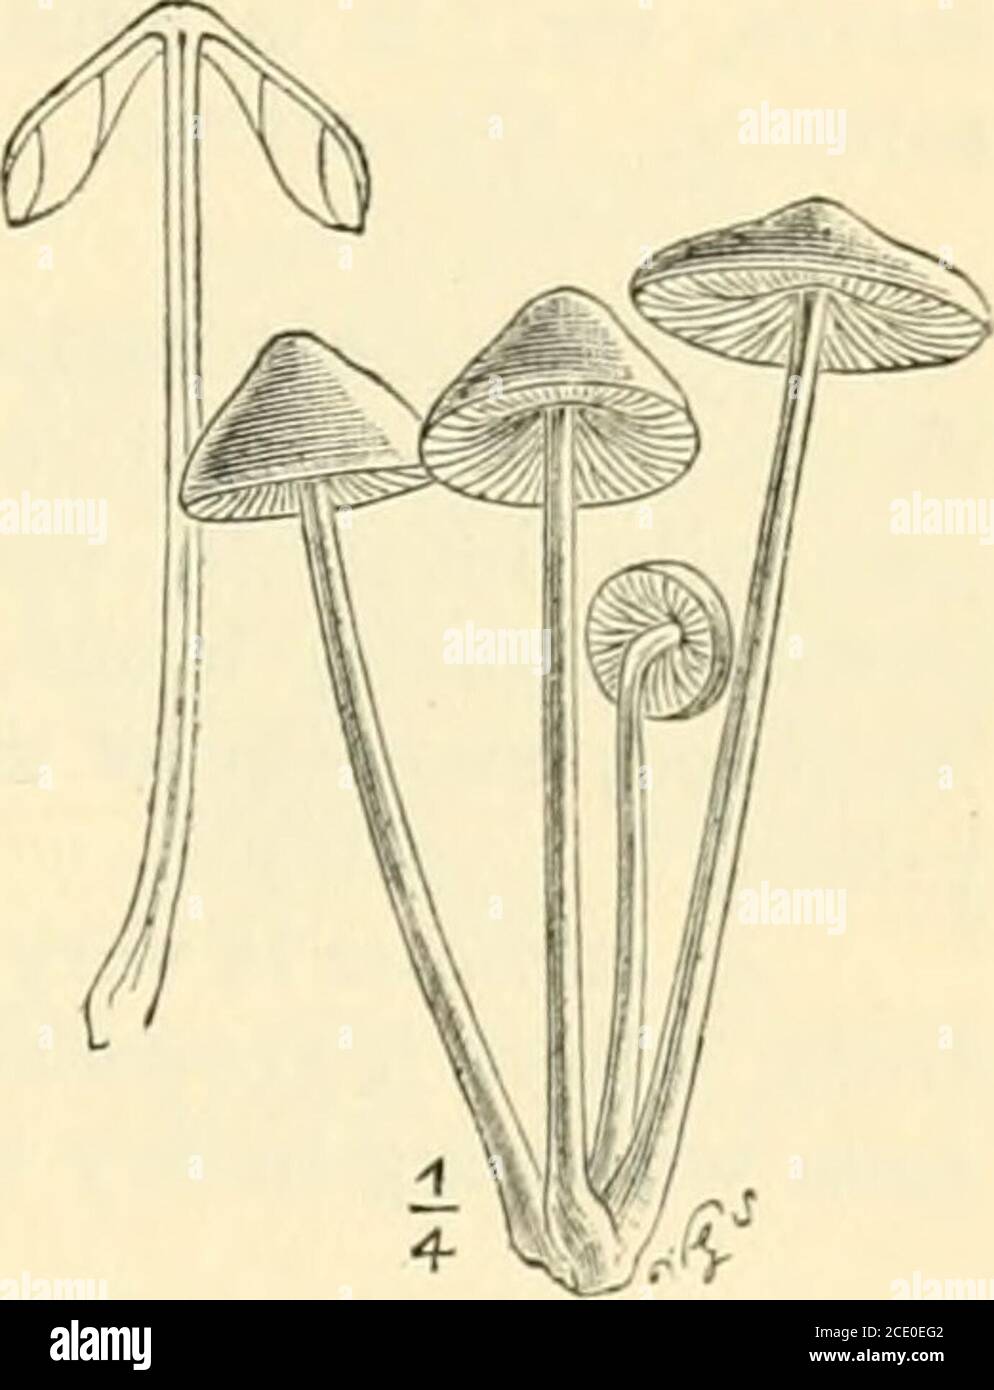 . Guide to Sowerby's models of British fungi in the Department of Botany, British Museum (Natural History) . cies arehighly fragile and fugitive, others are firmer Fig. n.—Type form of Mj-cena.and more persistent. They all grow in fdnT^;iLSat3s1ze.fautumn and early winter. 32. Agaricus purus Pers.—Pileus campanulate, then expanded,at length plane, umbonate, striate at margin, rose-coloured, varying topurple, lilac, violet, bluish-grey, white, or yellowish, highly brittleand semi-transparent; gills adnate, broad, ventricose, connected bya network of veins, pallid or whitish ; stalk hollow, some Stock Photo